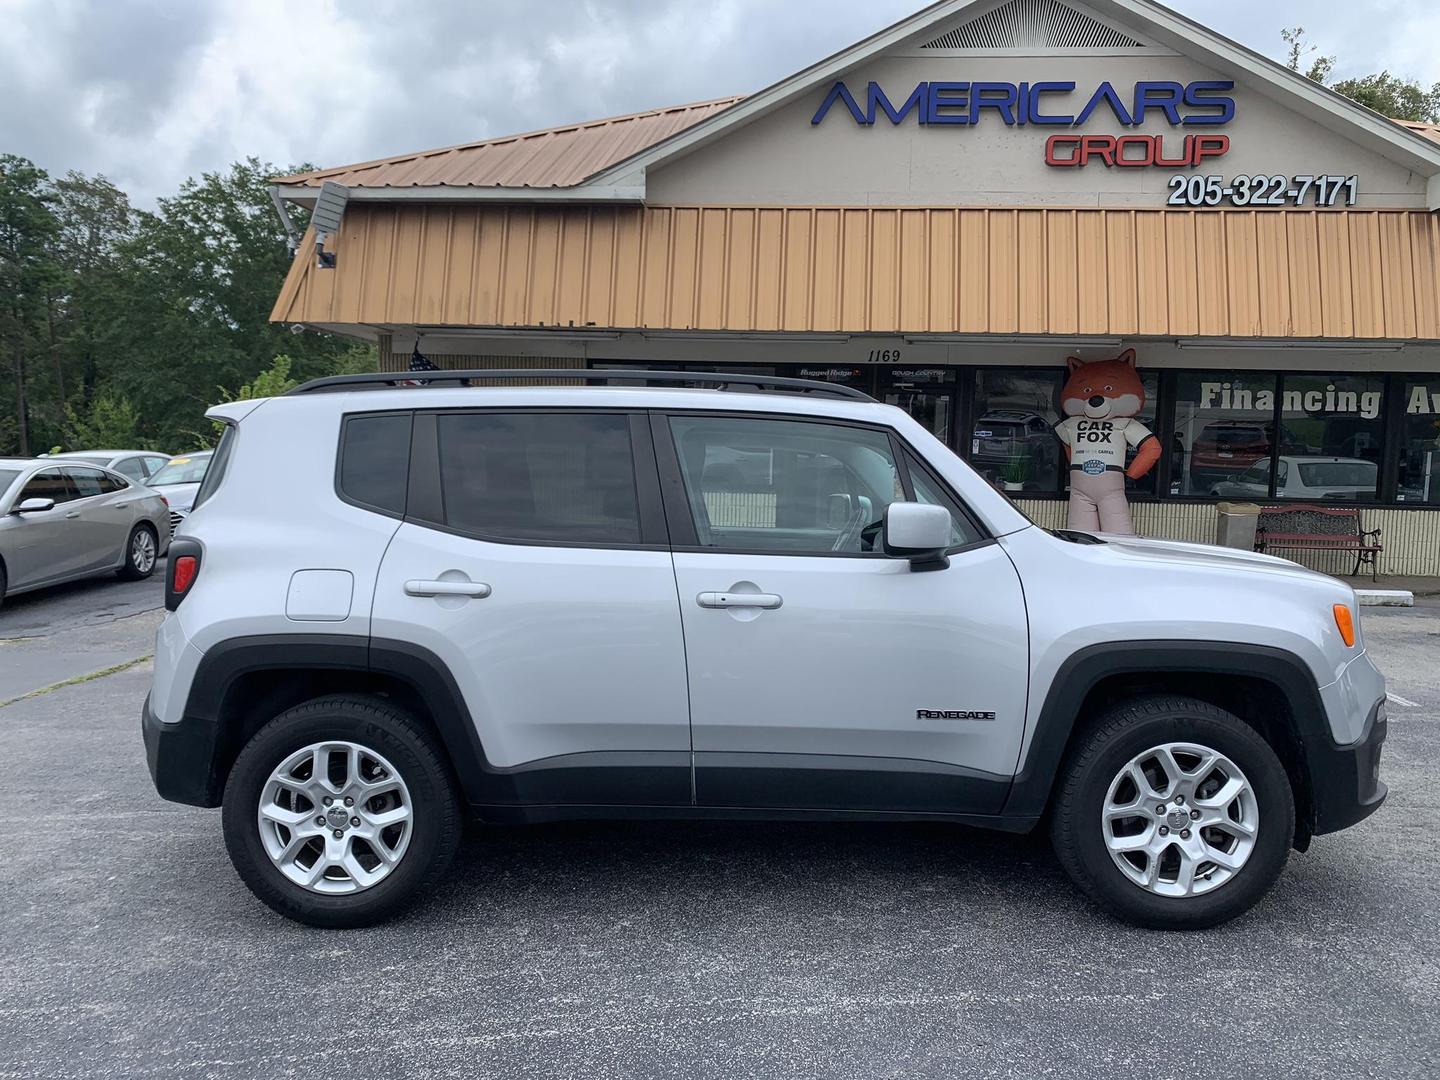 USED JEEP RENEGADE 2016 for sale in Hoover AL AMERICARS GROUP LLC